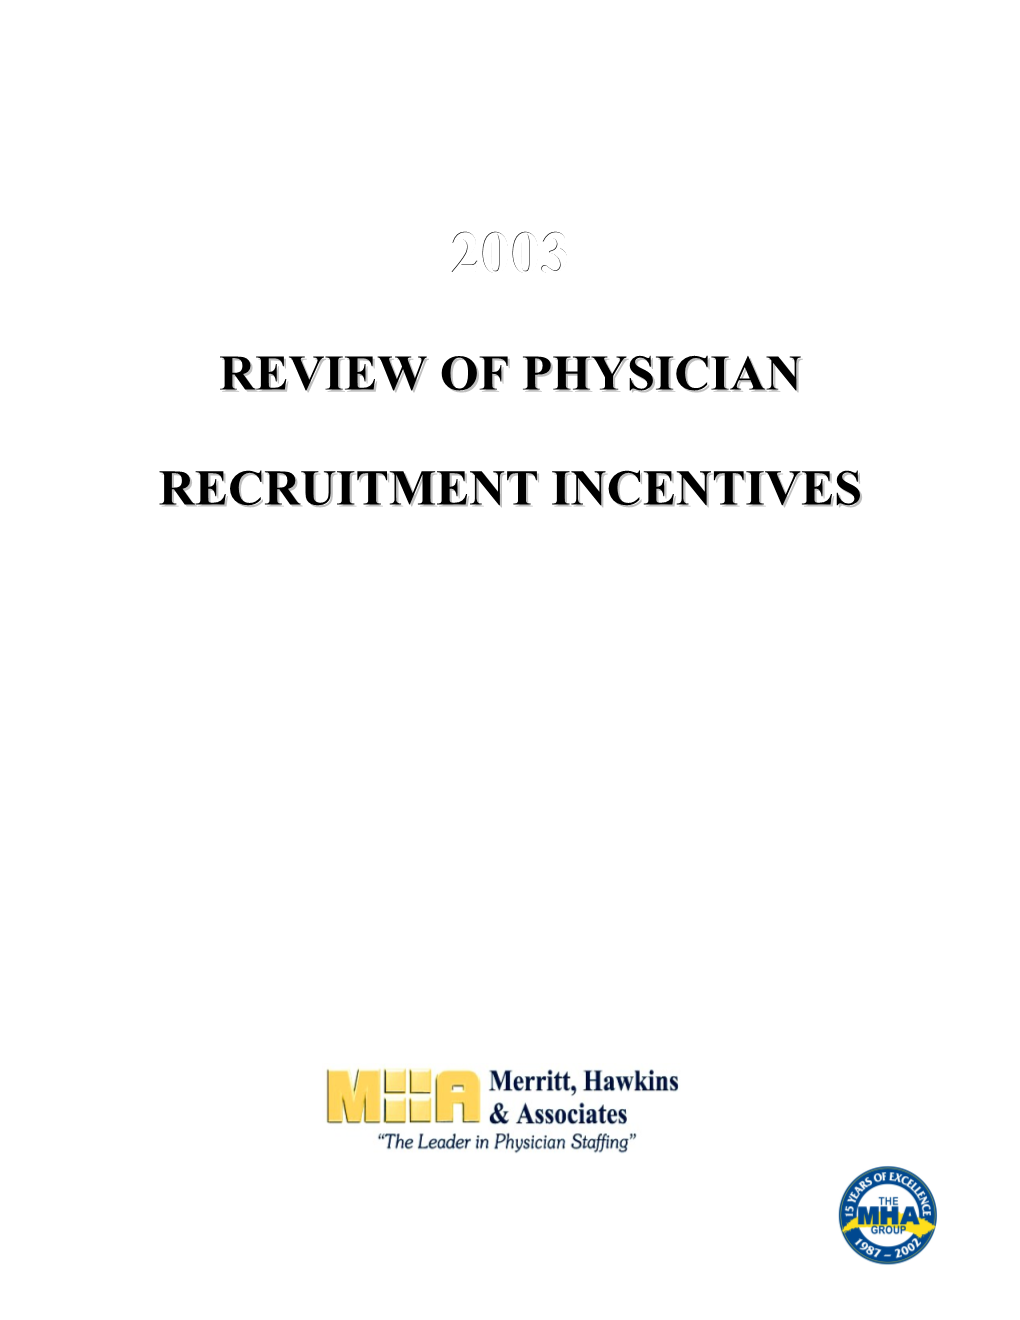 Review of Physician